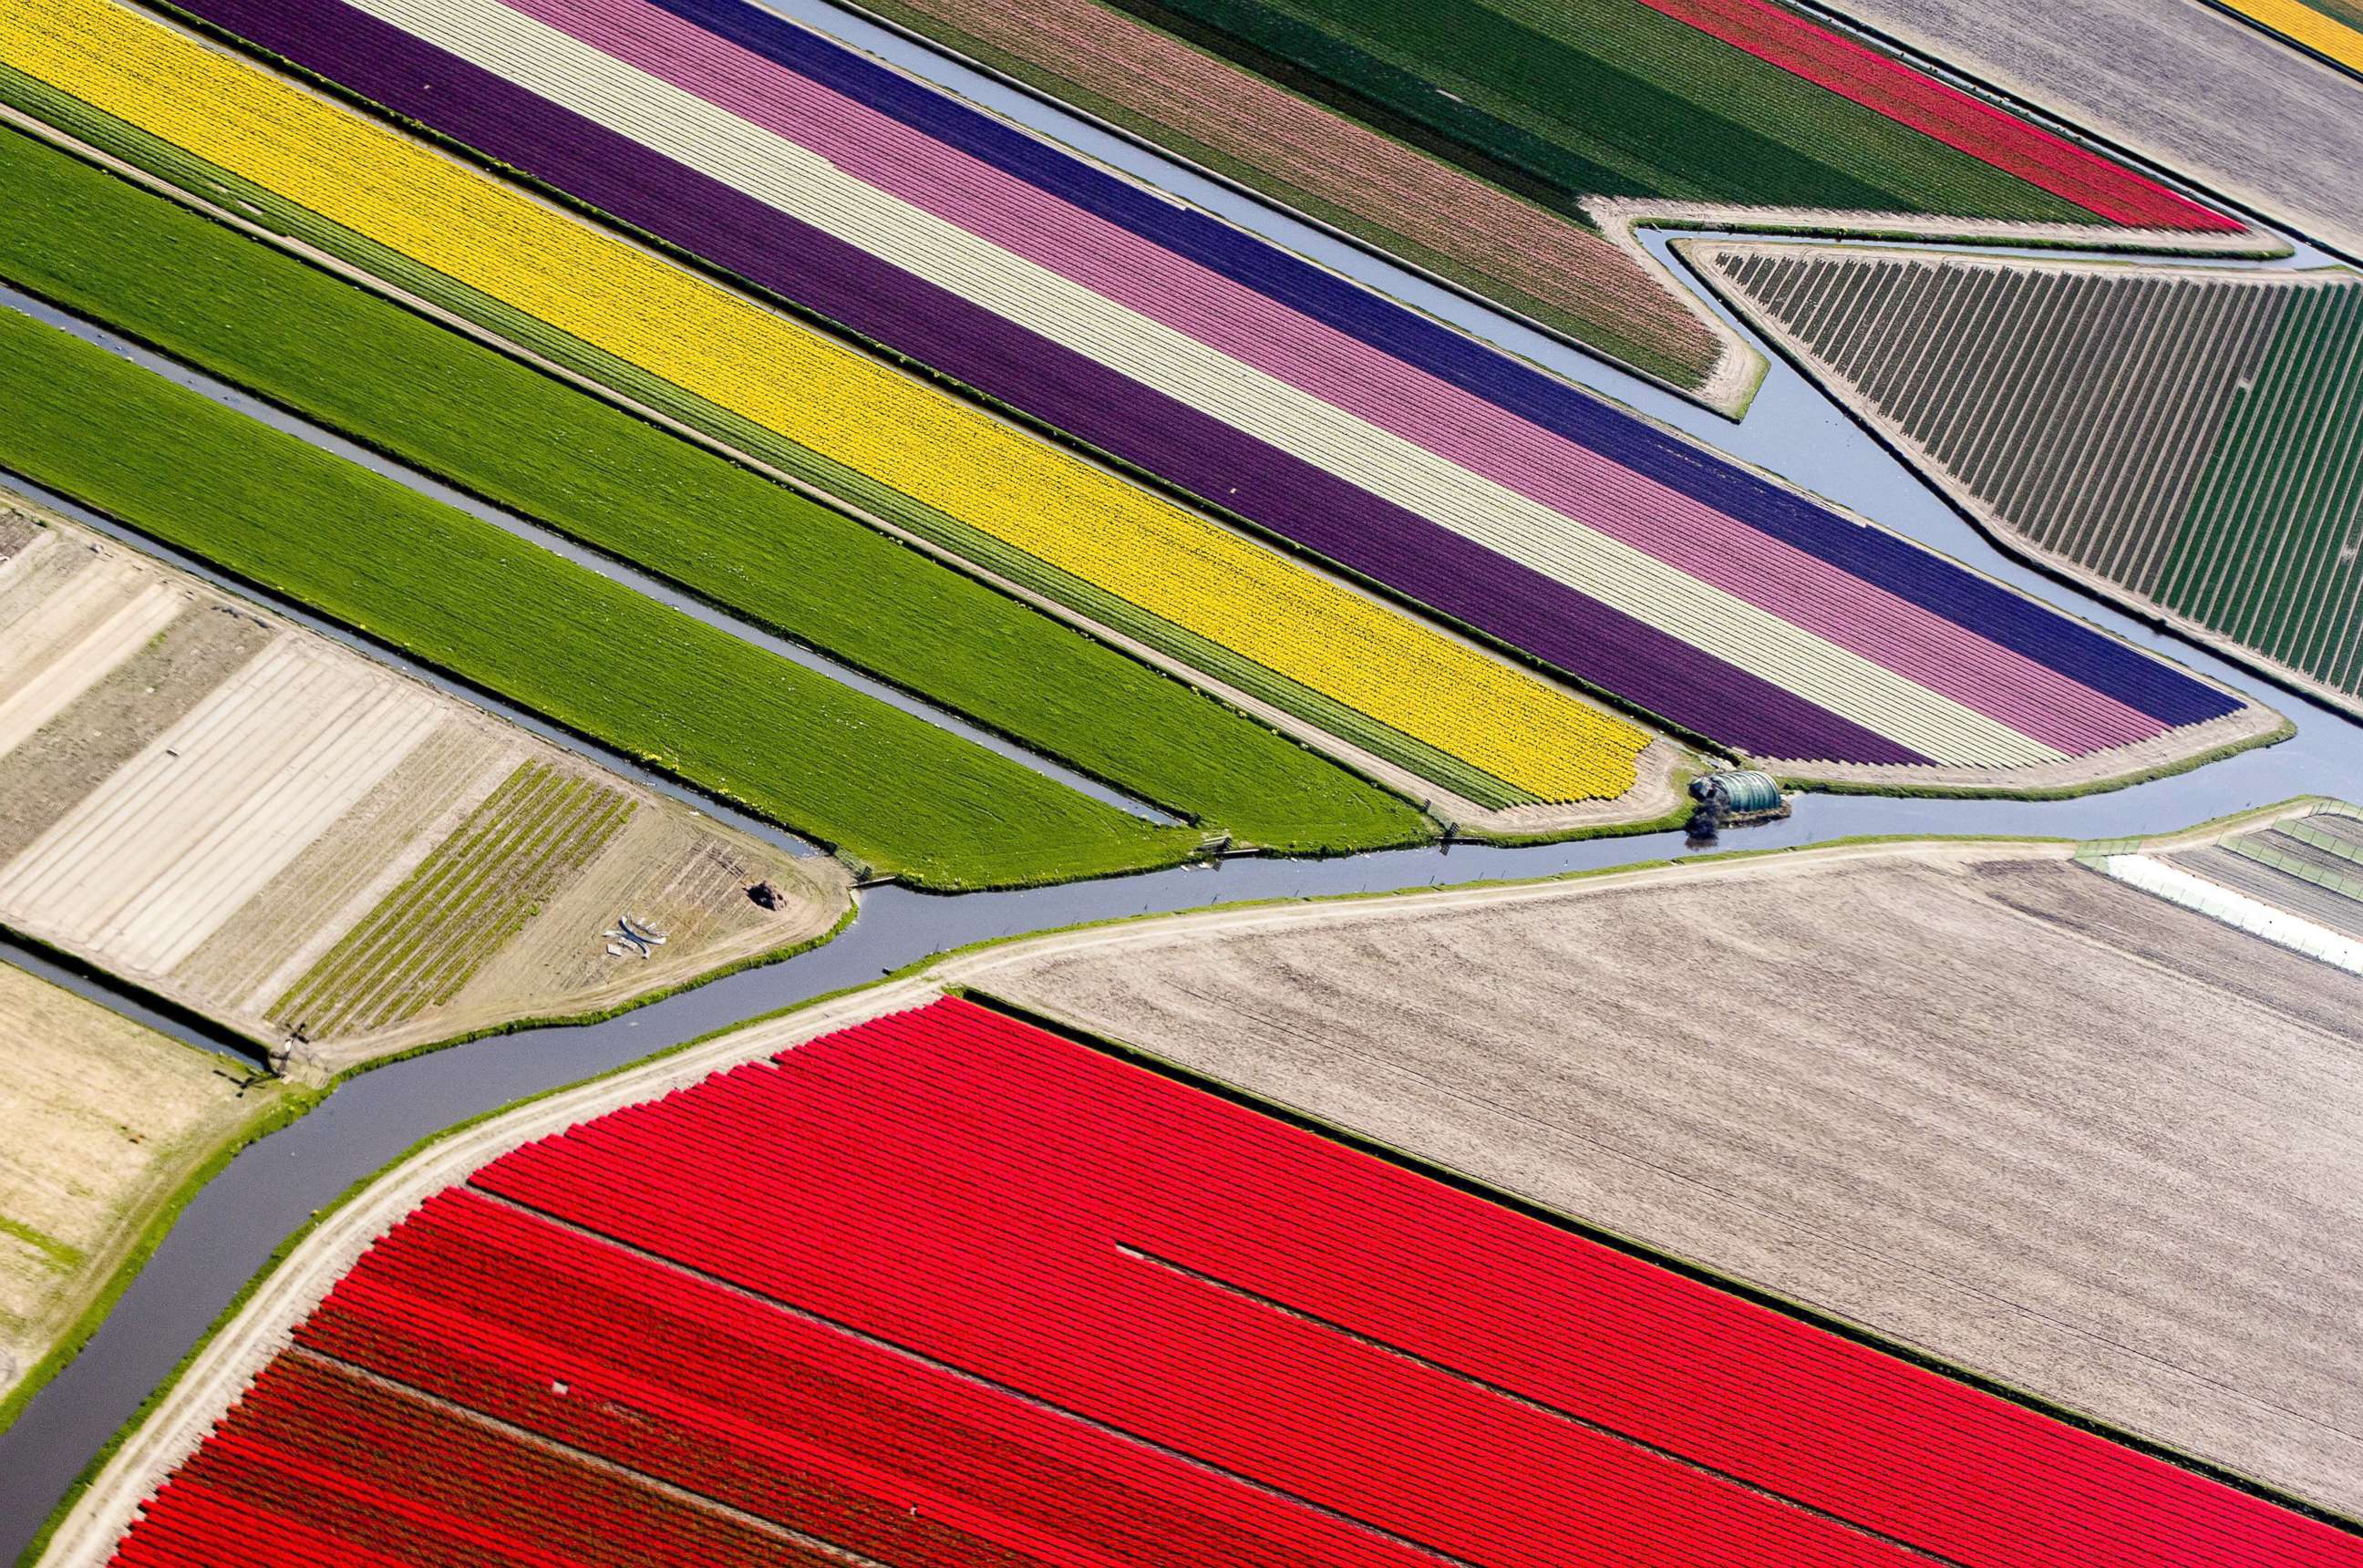 PHOTO: An aerial photograph of the blossoming bulb fields and water canals in Lisse, The Netherlands, April 20, 2018.